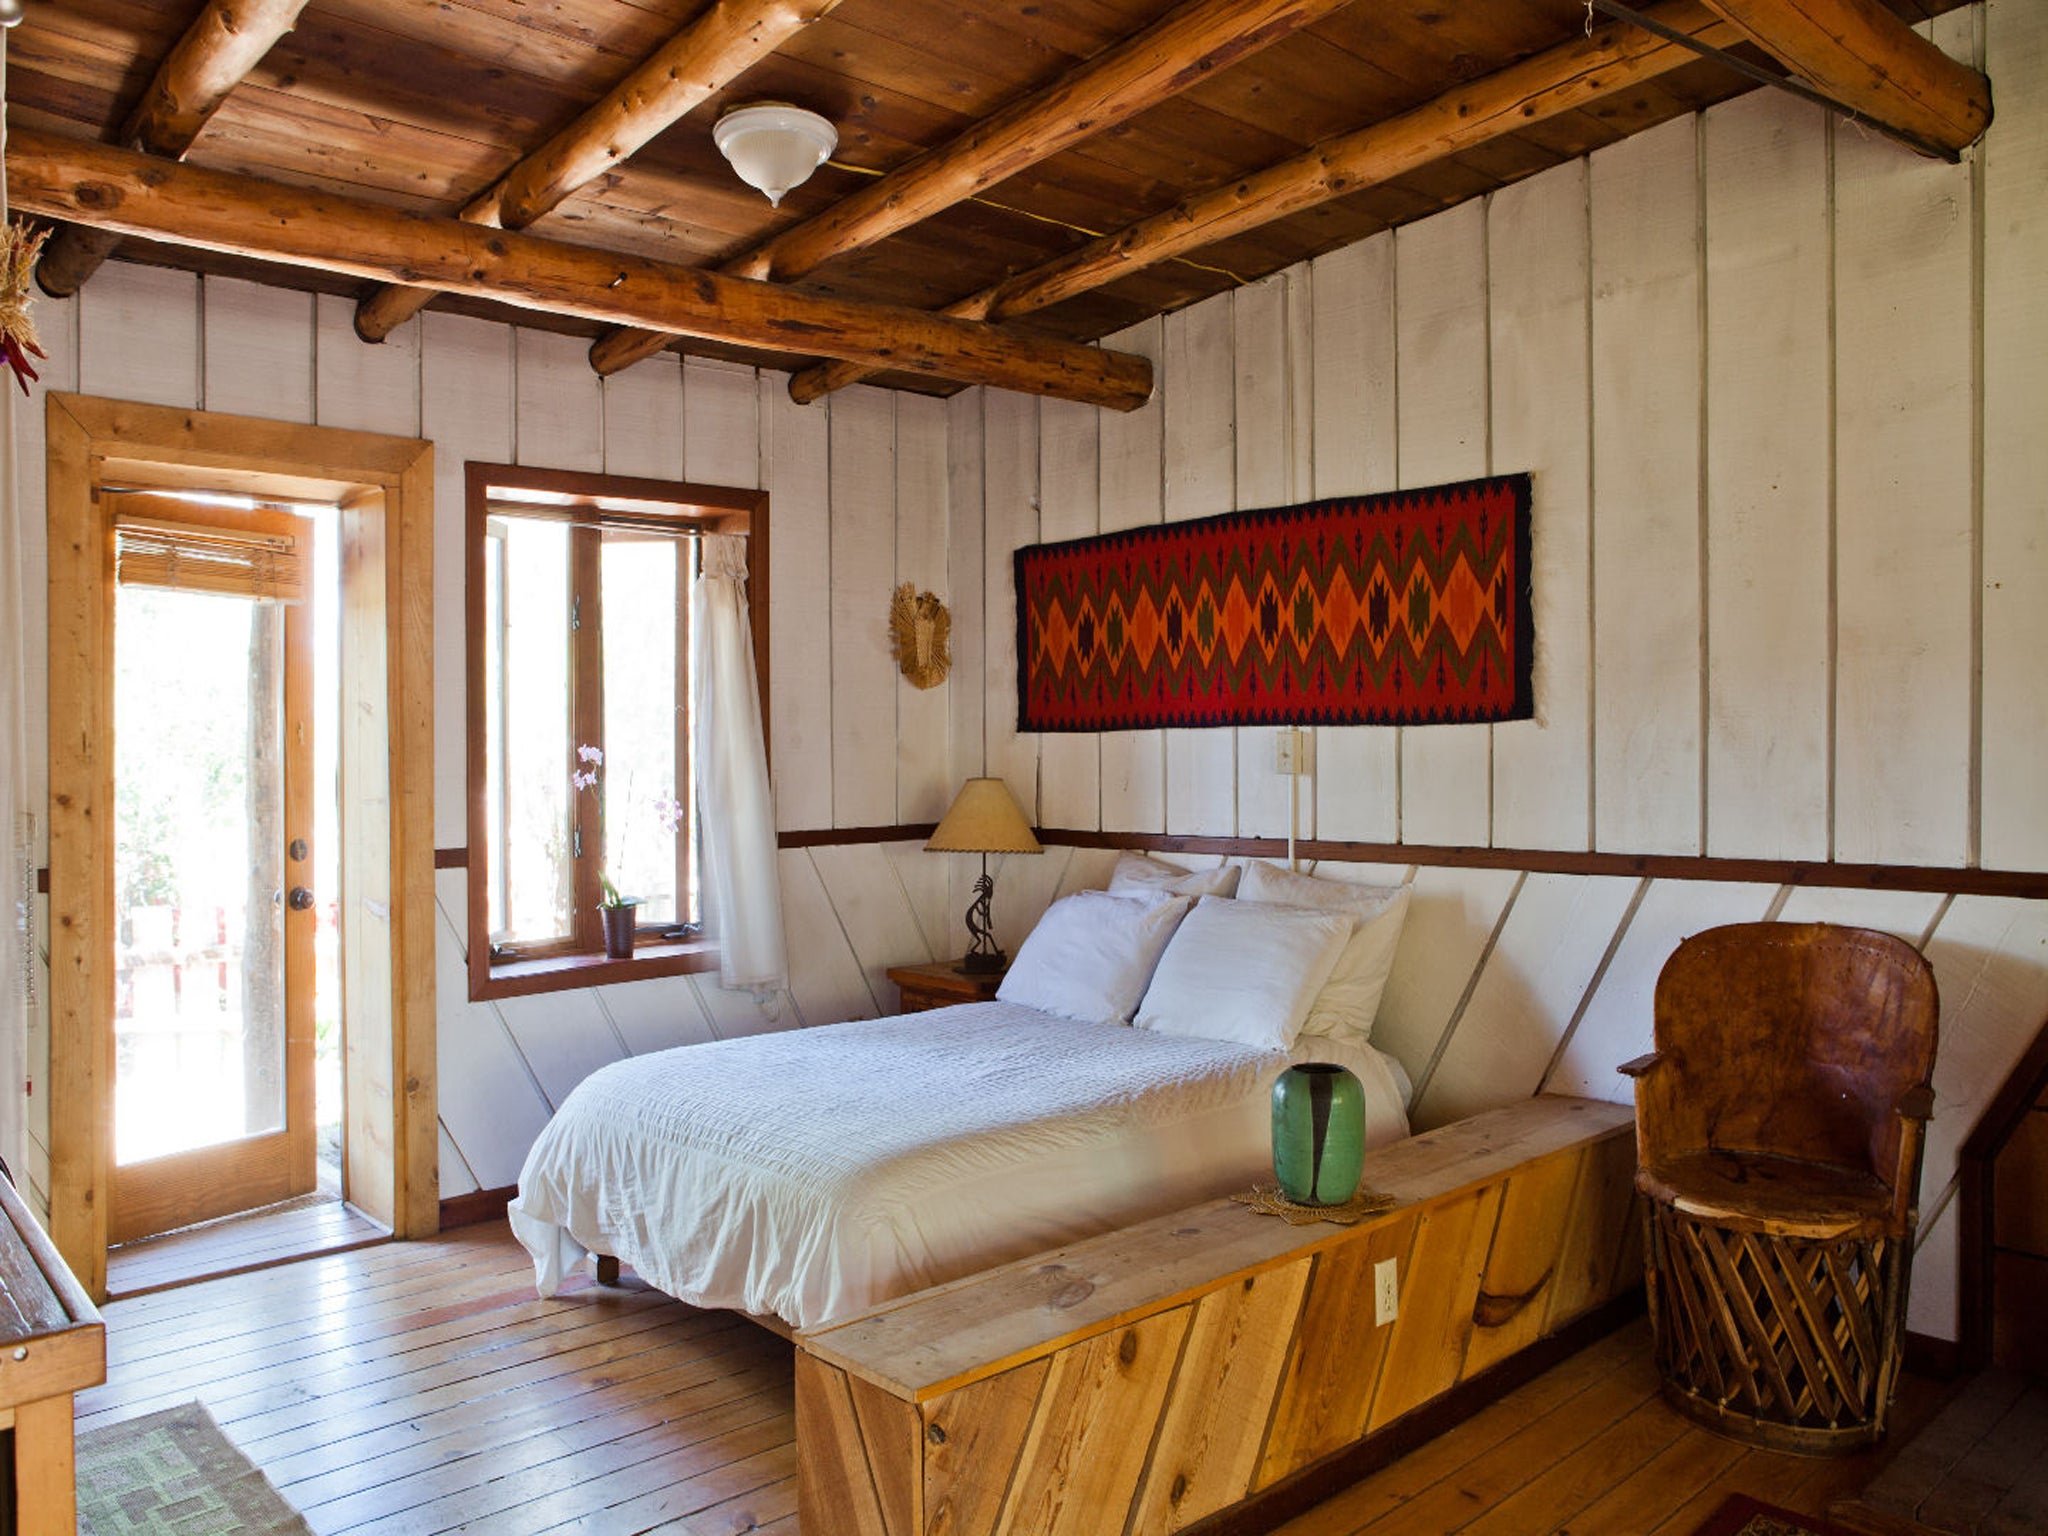 Huxley and D.H Lawrence stayed in this New Mexico cabin